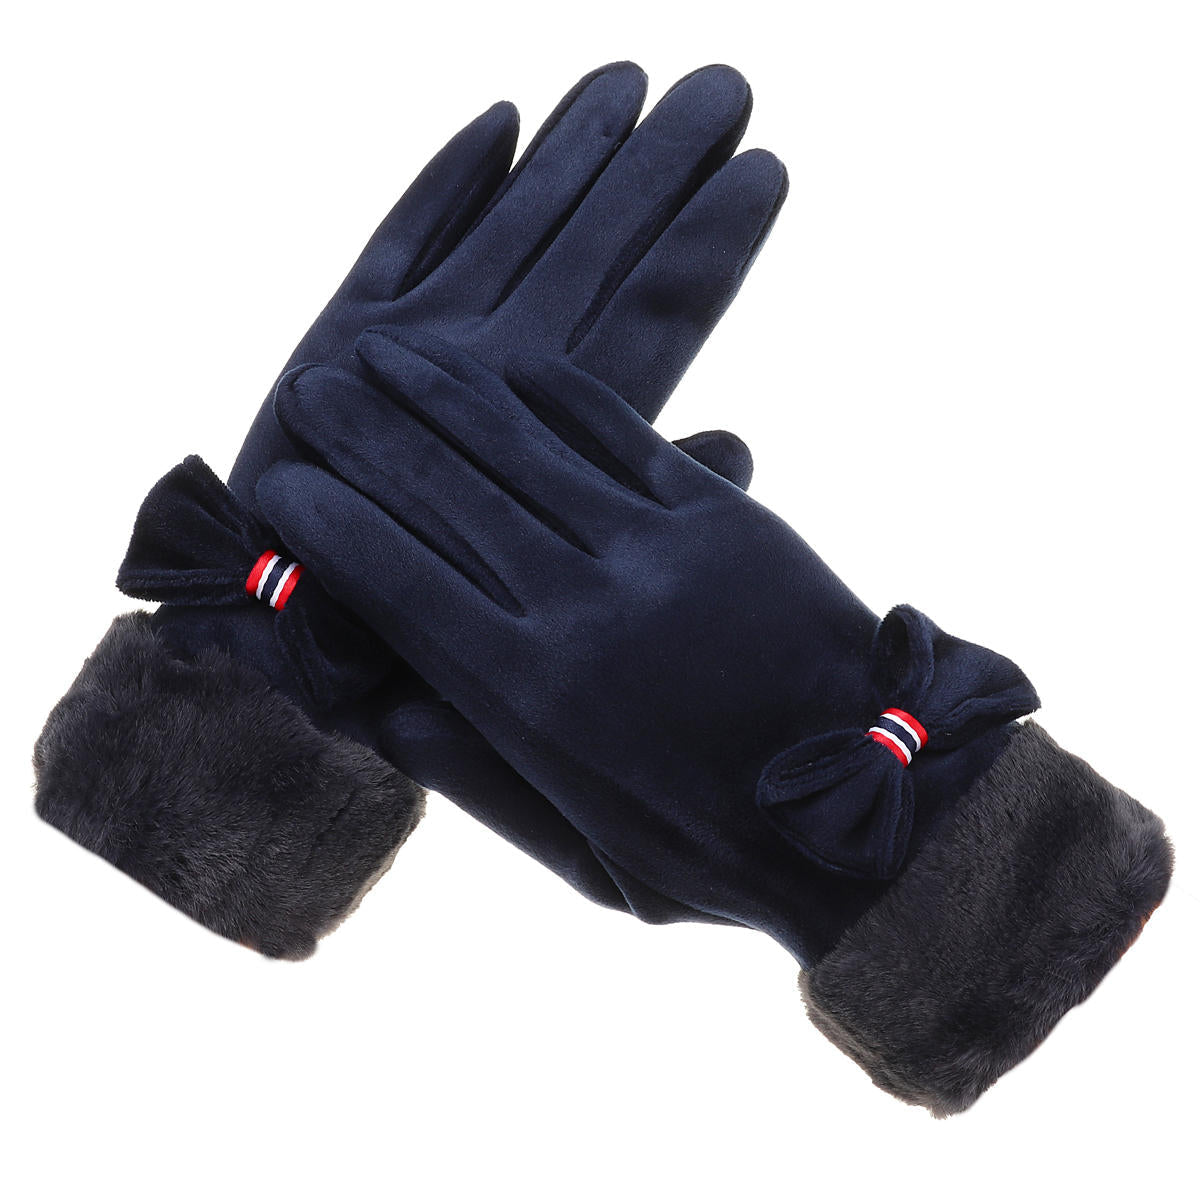 Winter Warm Gloves Touch Screen Windproof Riding Skiing Outdoor Sports Gloves